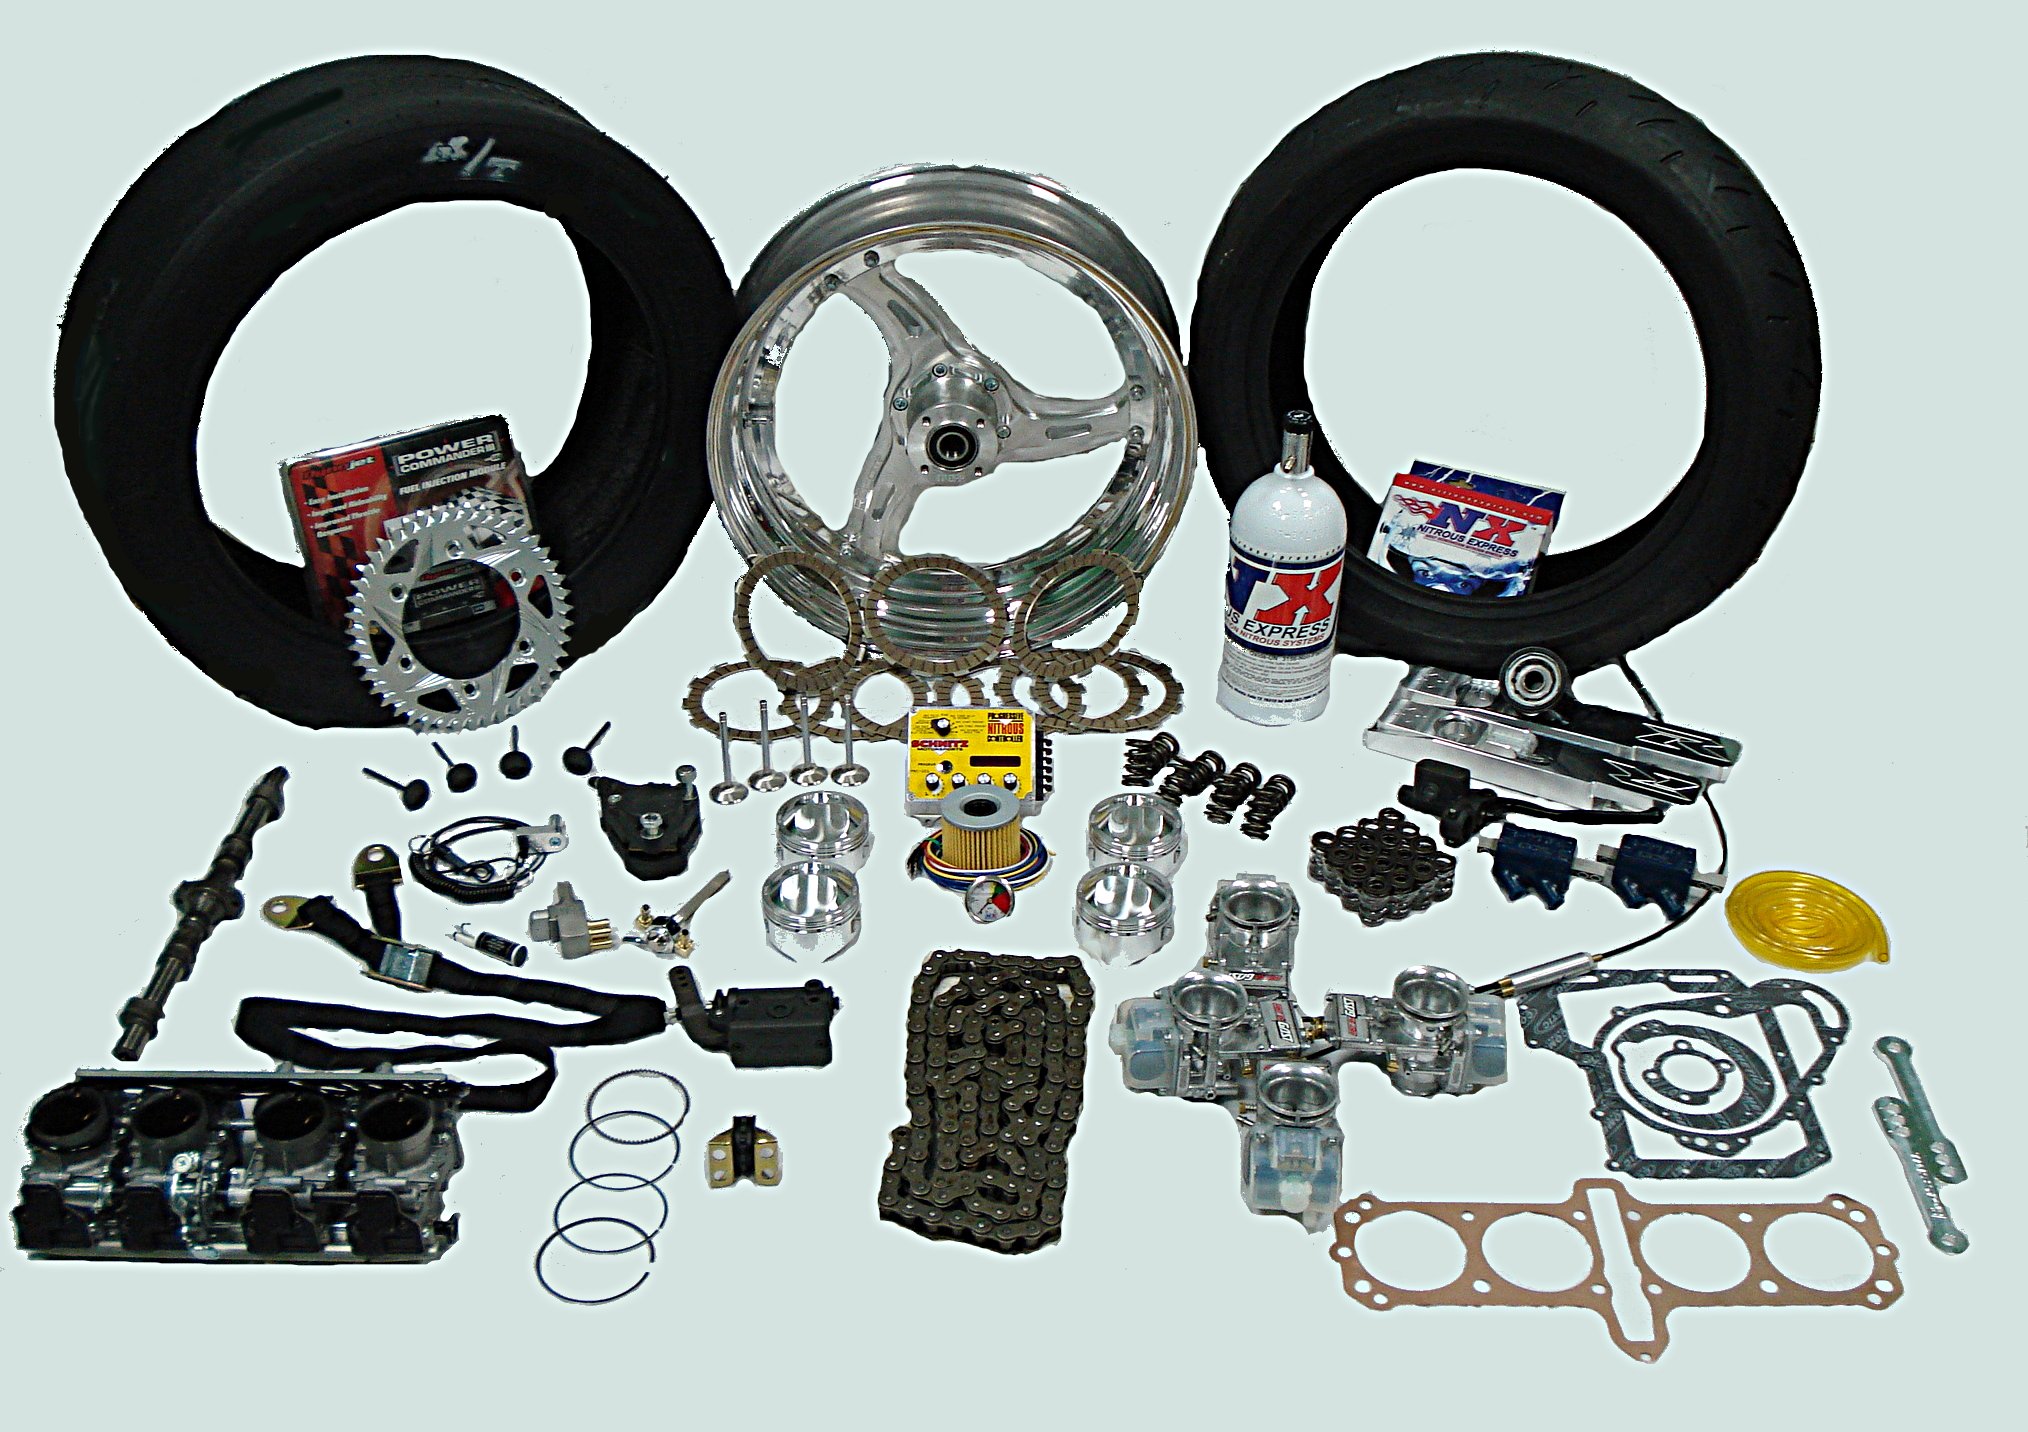 Motobarn Offers Massive Range of Motorcycle Accessories and Gears for